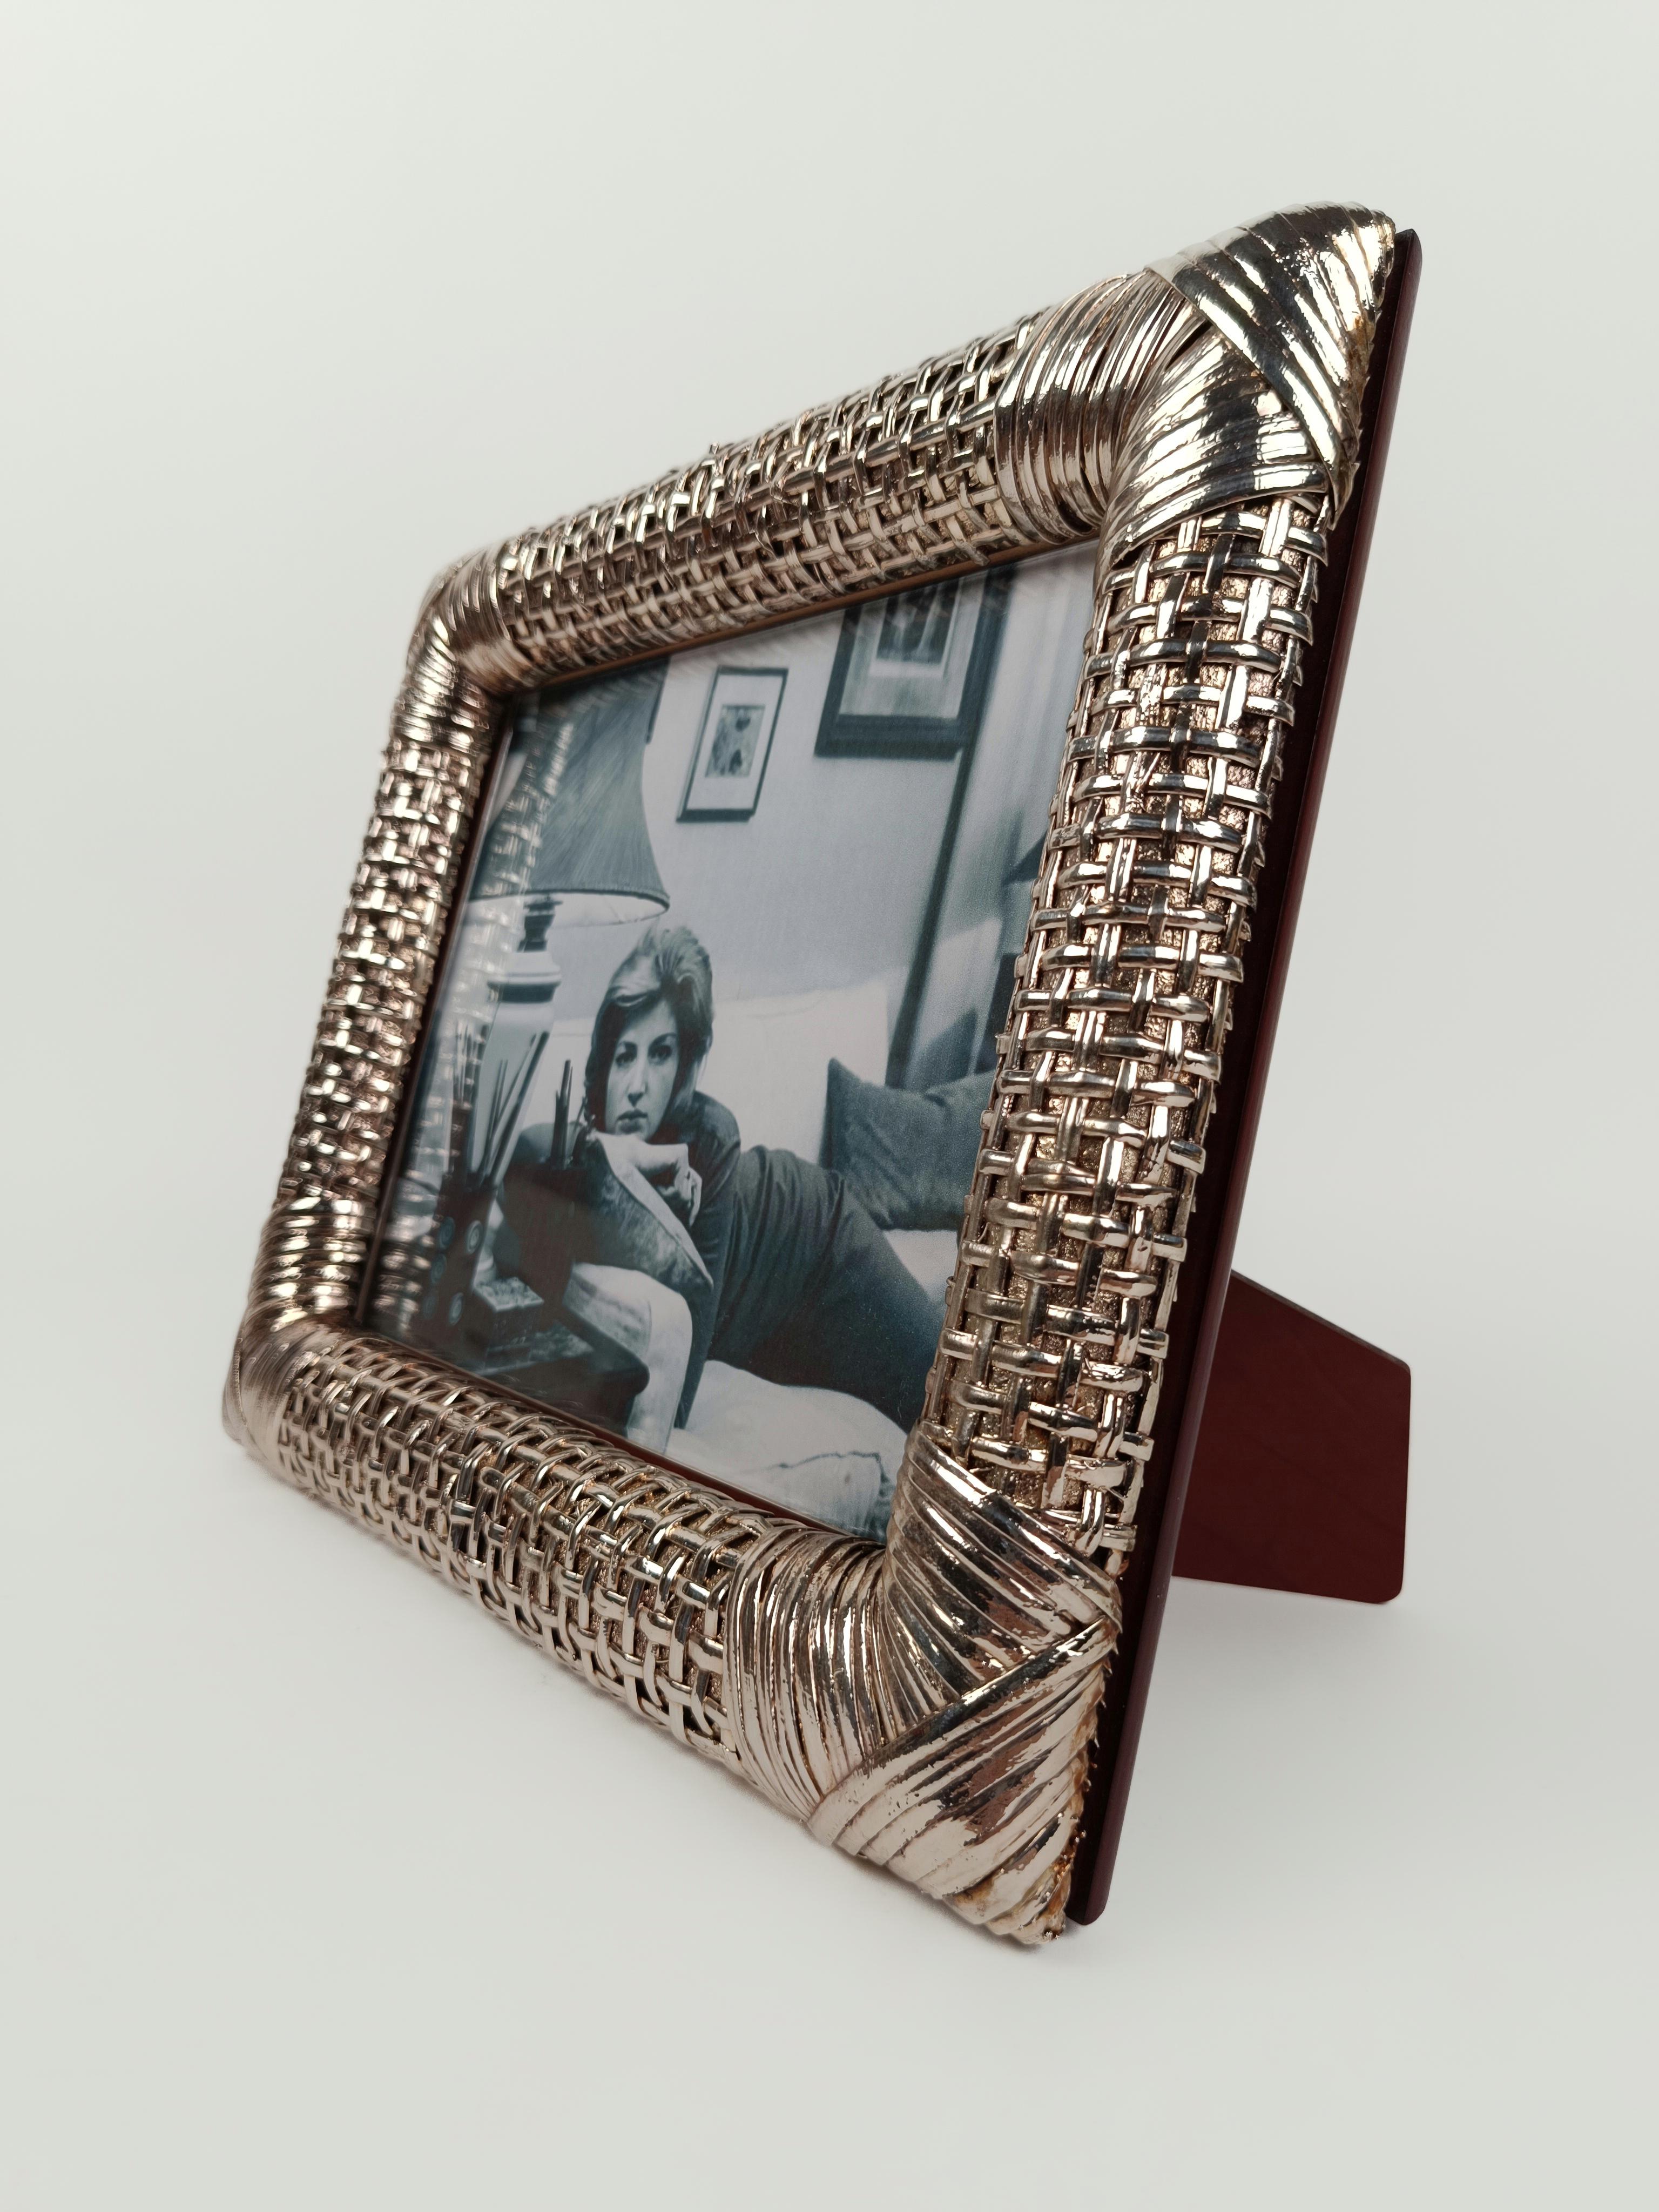 20th Century Midcentury Table Picture Frame Made in Silver Plated Woven Wicker, Italy 1970s For Sale